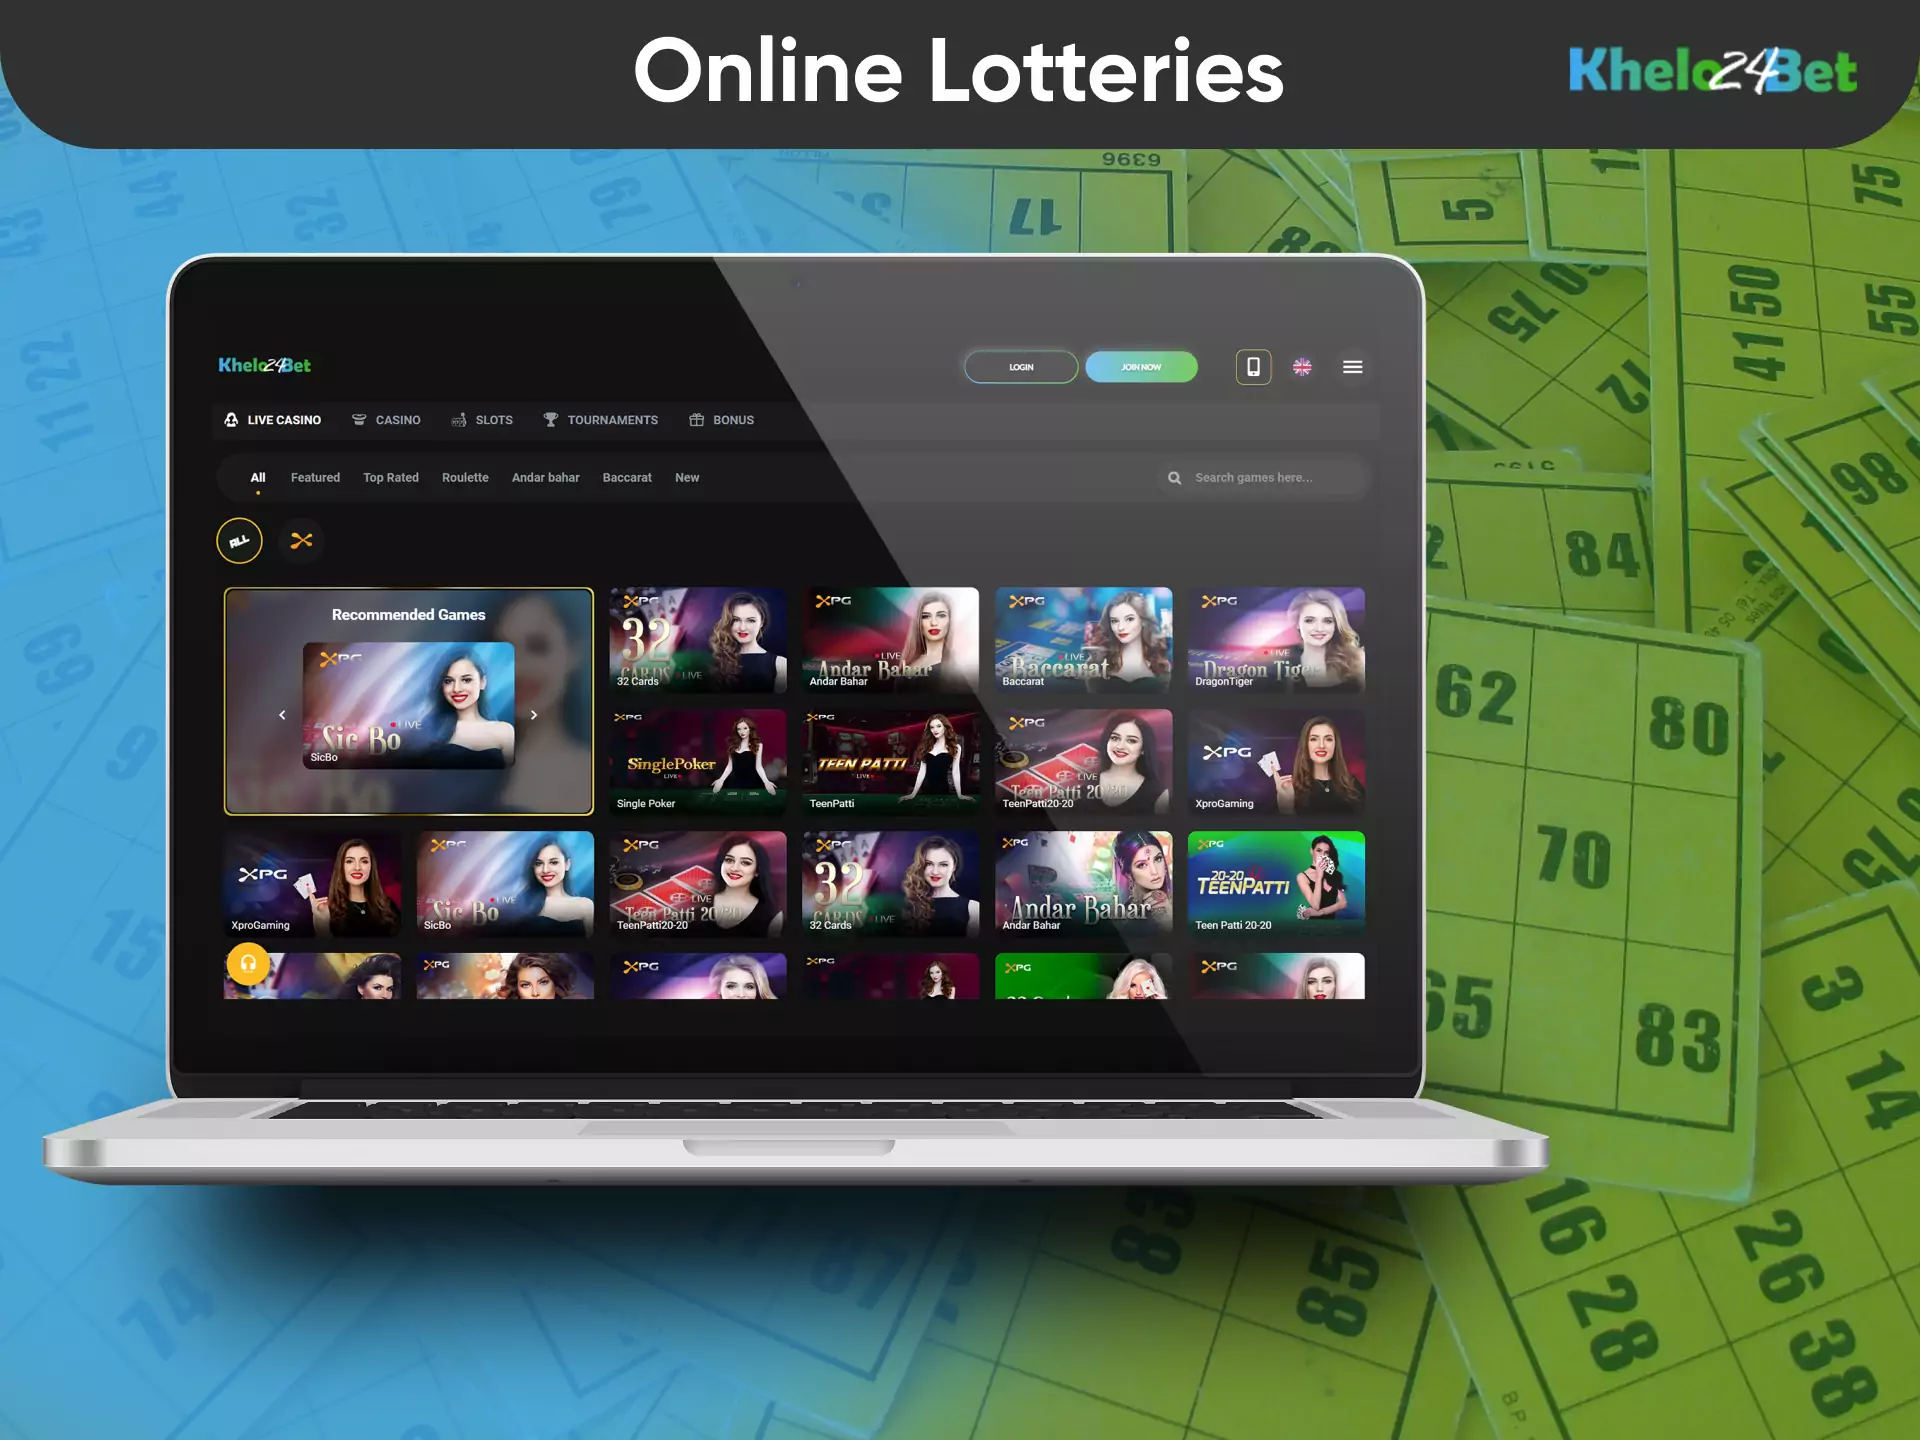 You can buy lotteries on Khelo24bet and check results on the site.